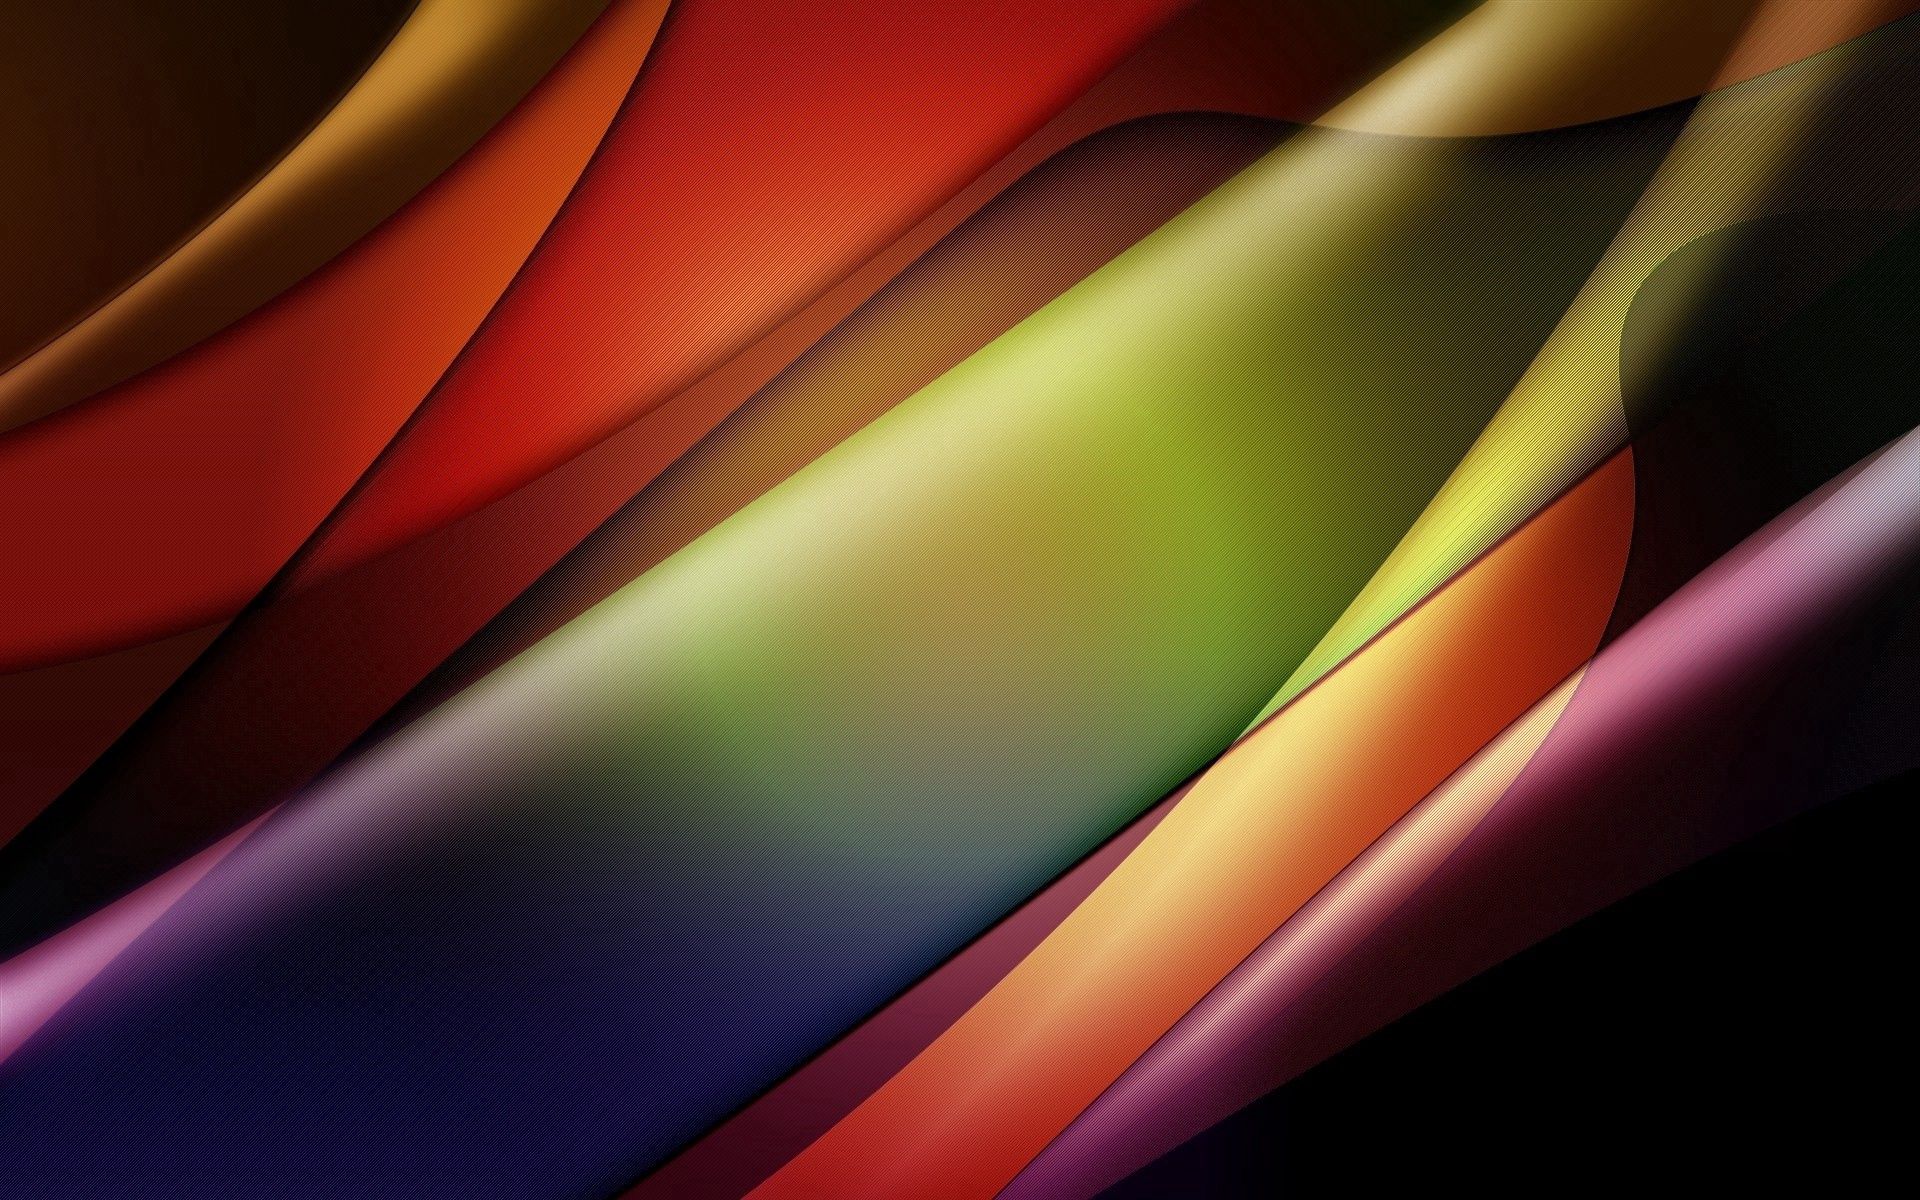 multicolored, abstract, dark, motley, lines, stripes, streaks wallpaper for mobile